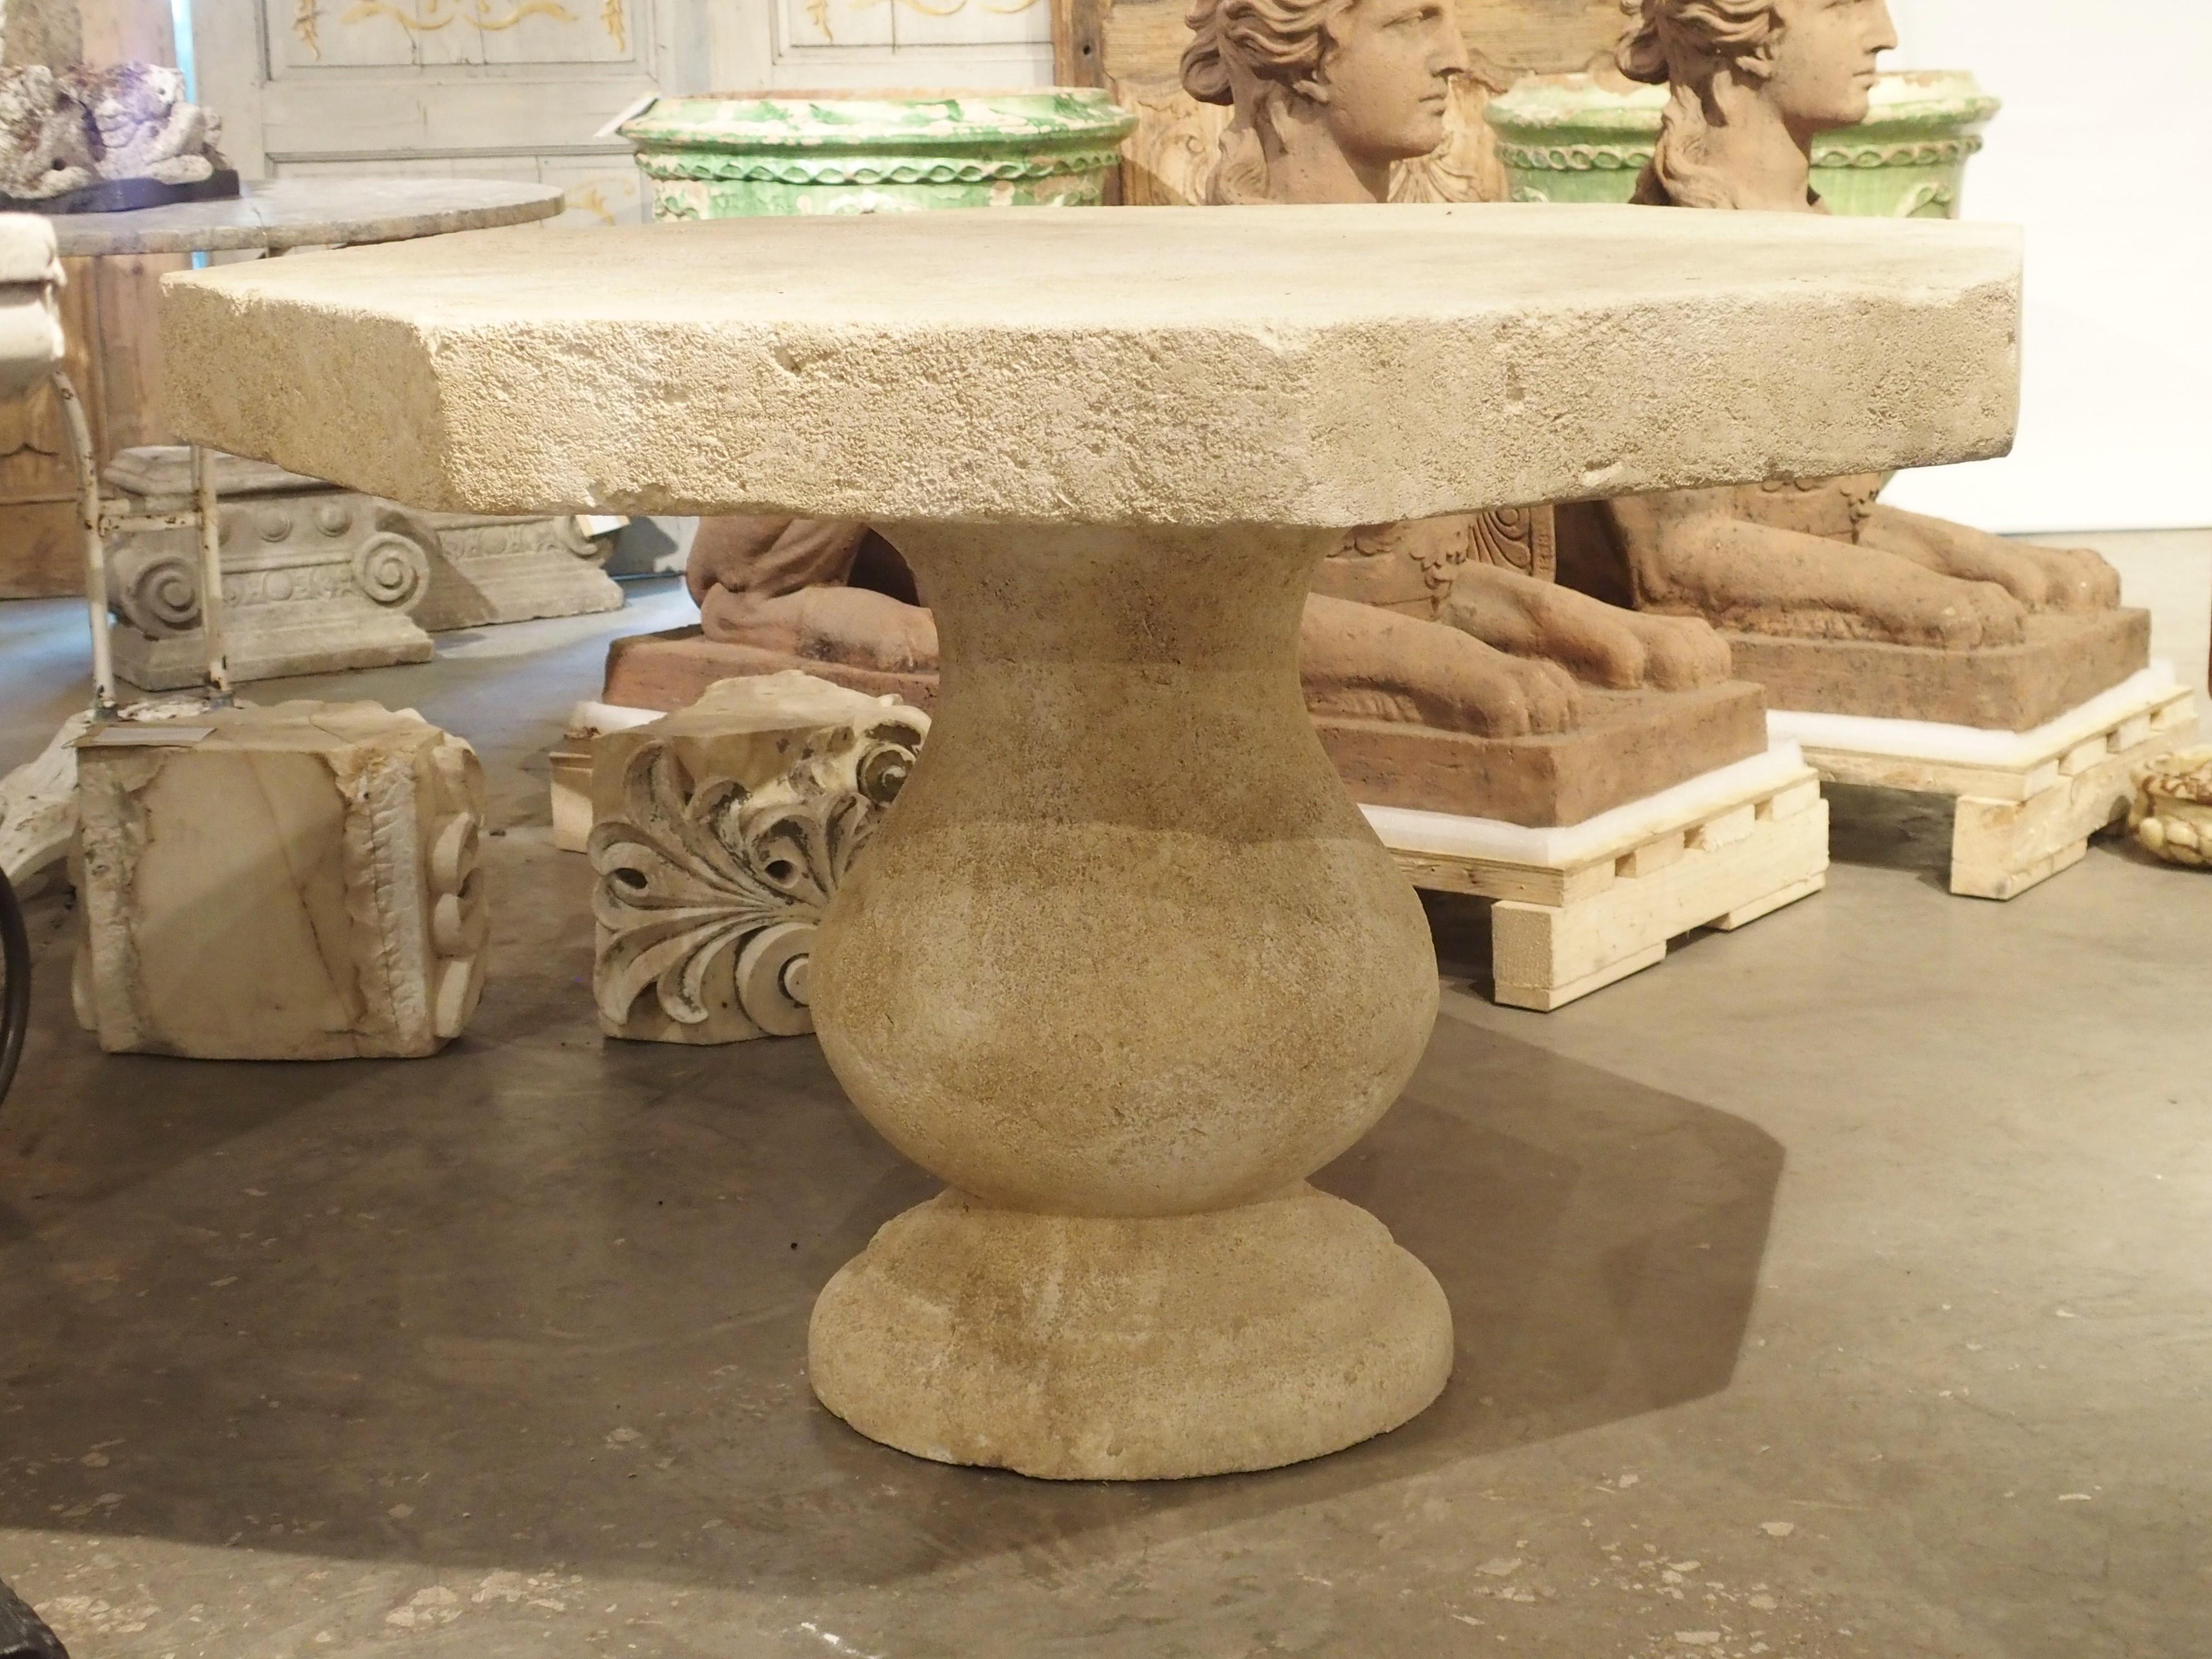 This versatile, hand carved, octagonal stone table from France can be used outdoors as well as inside. A four inch thick carved top sits on a large, single baluster leg. It is made of French estaillade limestone, which has been used for centuries in